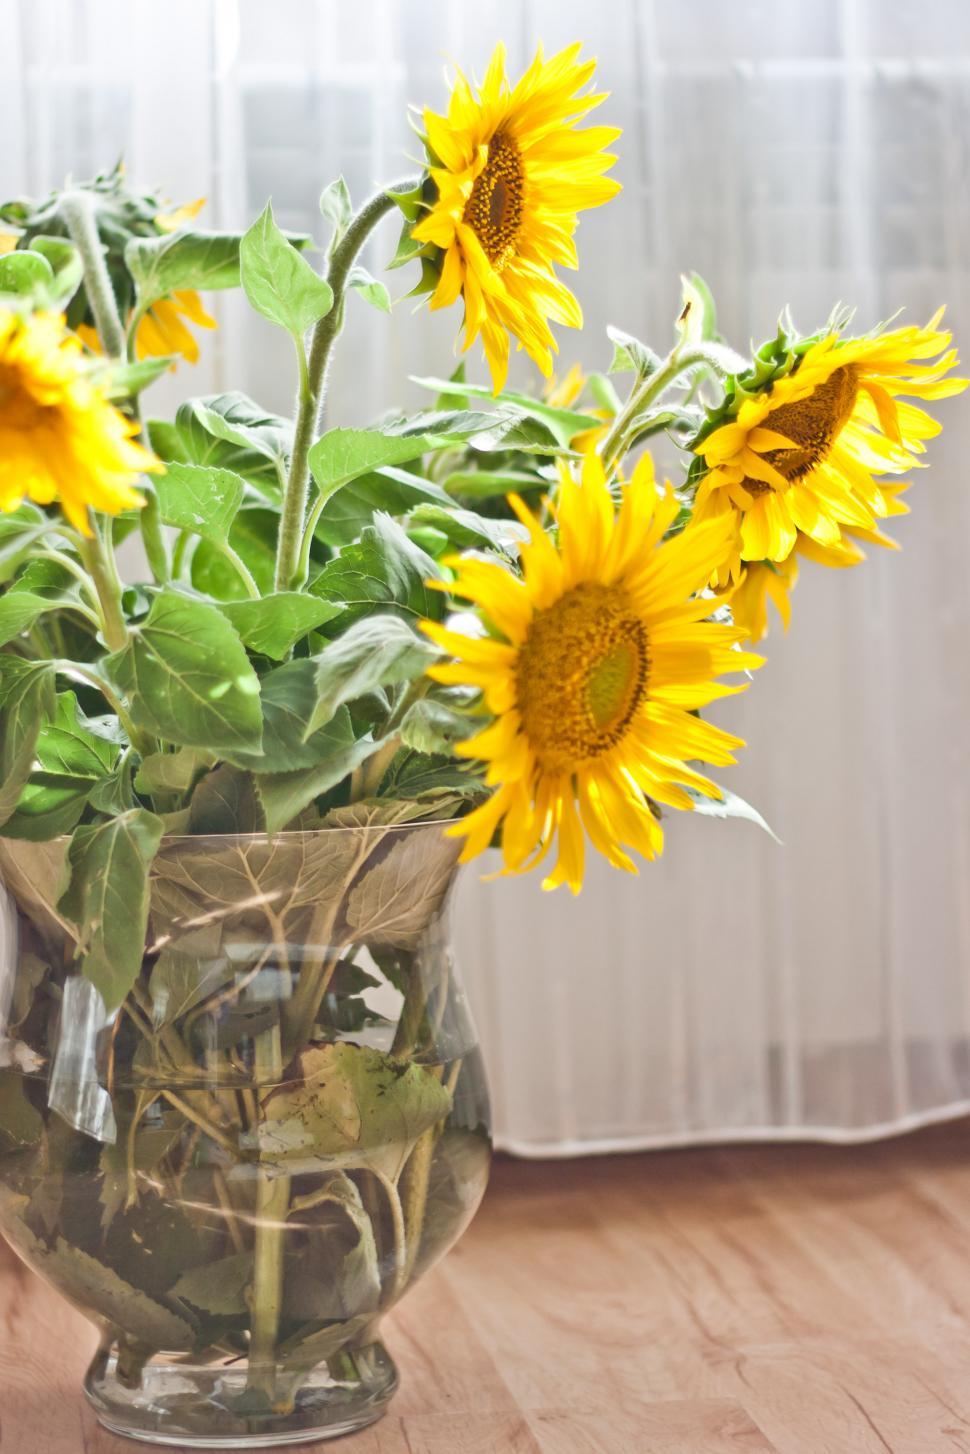 Free Image of Vase Filled With Yellow Flowers on Wooden Floor 